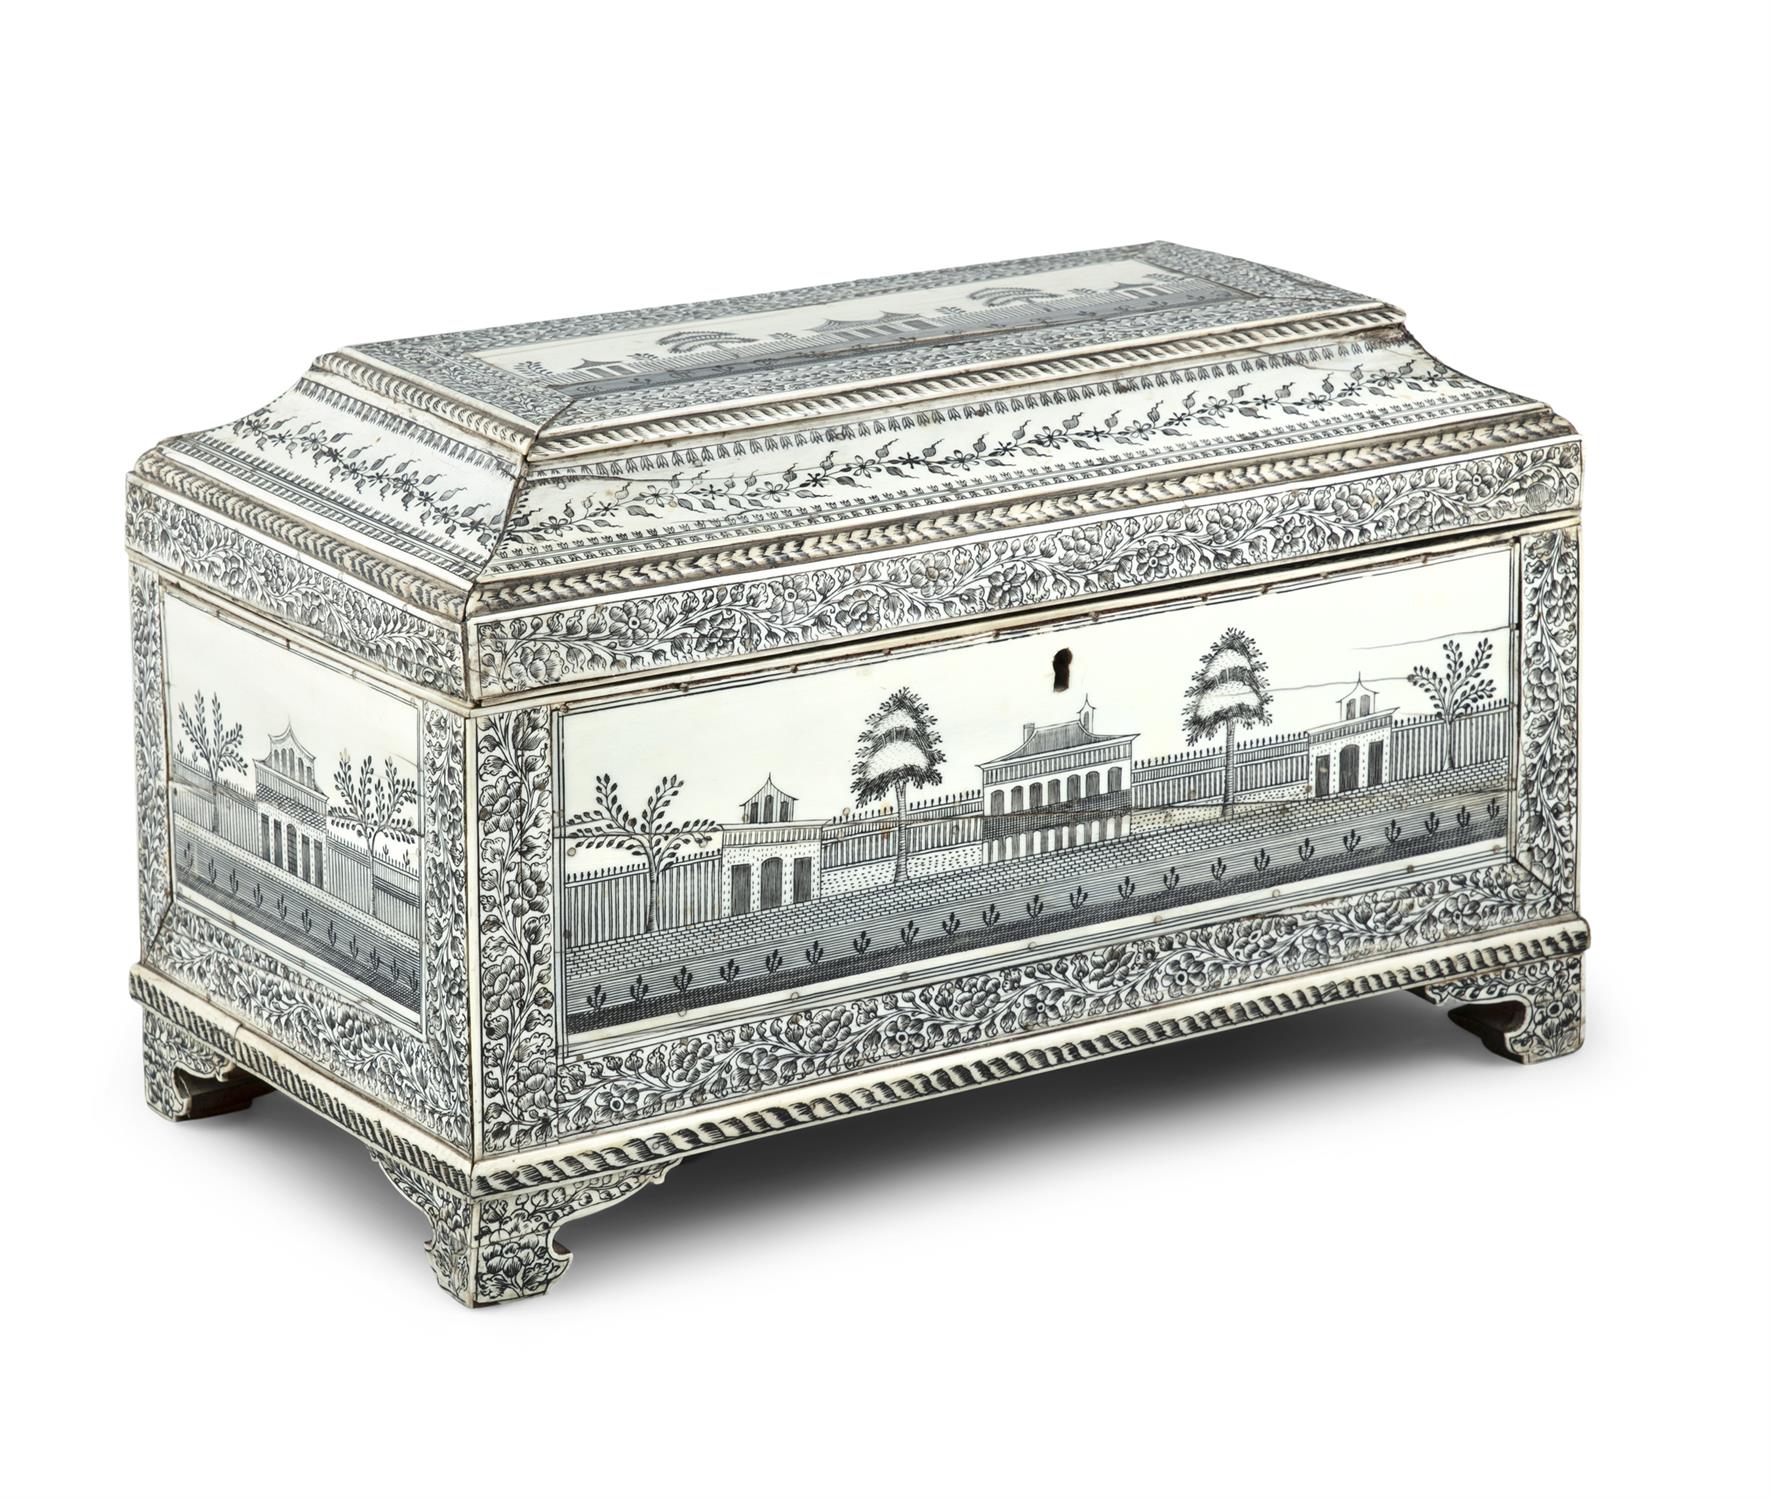 AN ANGLO-INDIAN VIZAGAPATAM TEA CASKET, c.1800, engraved overall in black ink with foliate borders - Image 2 of 22